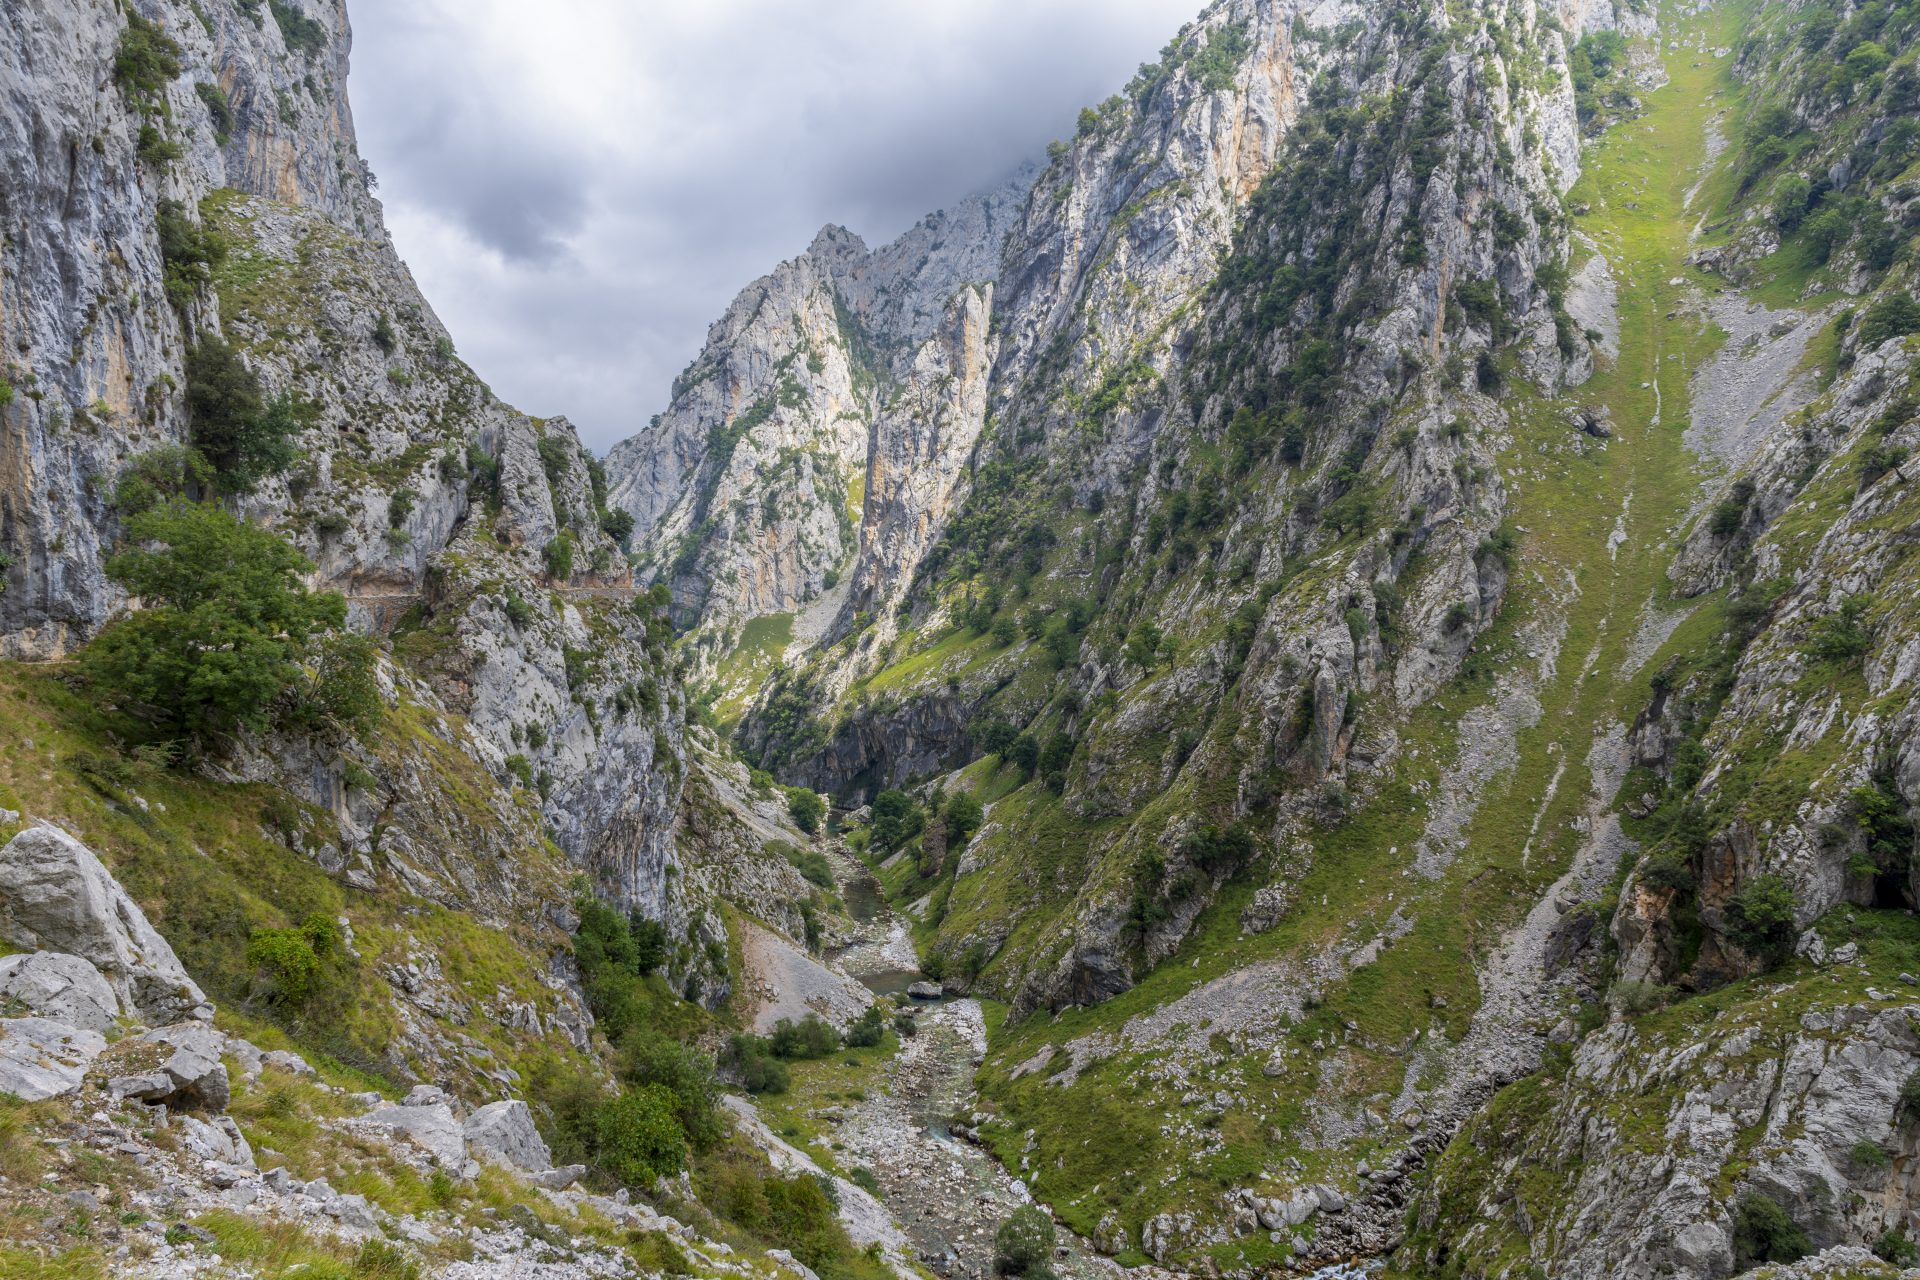 <p>In Asturias, in northern Spain, this hiking trail through the Picos de Europa reaches the villages of Poncebos and Posada de Valdeón. By car, the two villages are almost 100 km apart, but following the Cares river in the cliffs, you will only have to walk 12 km to go. The spectacular scenery is worth the return trip.</p>